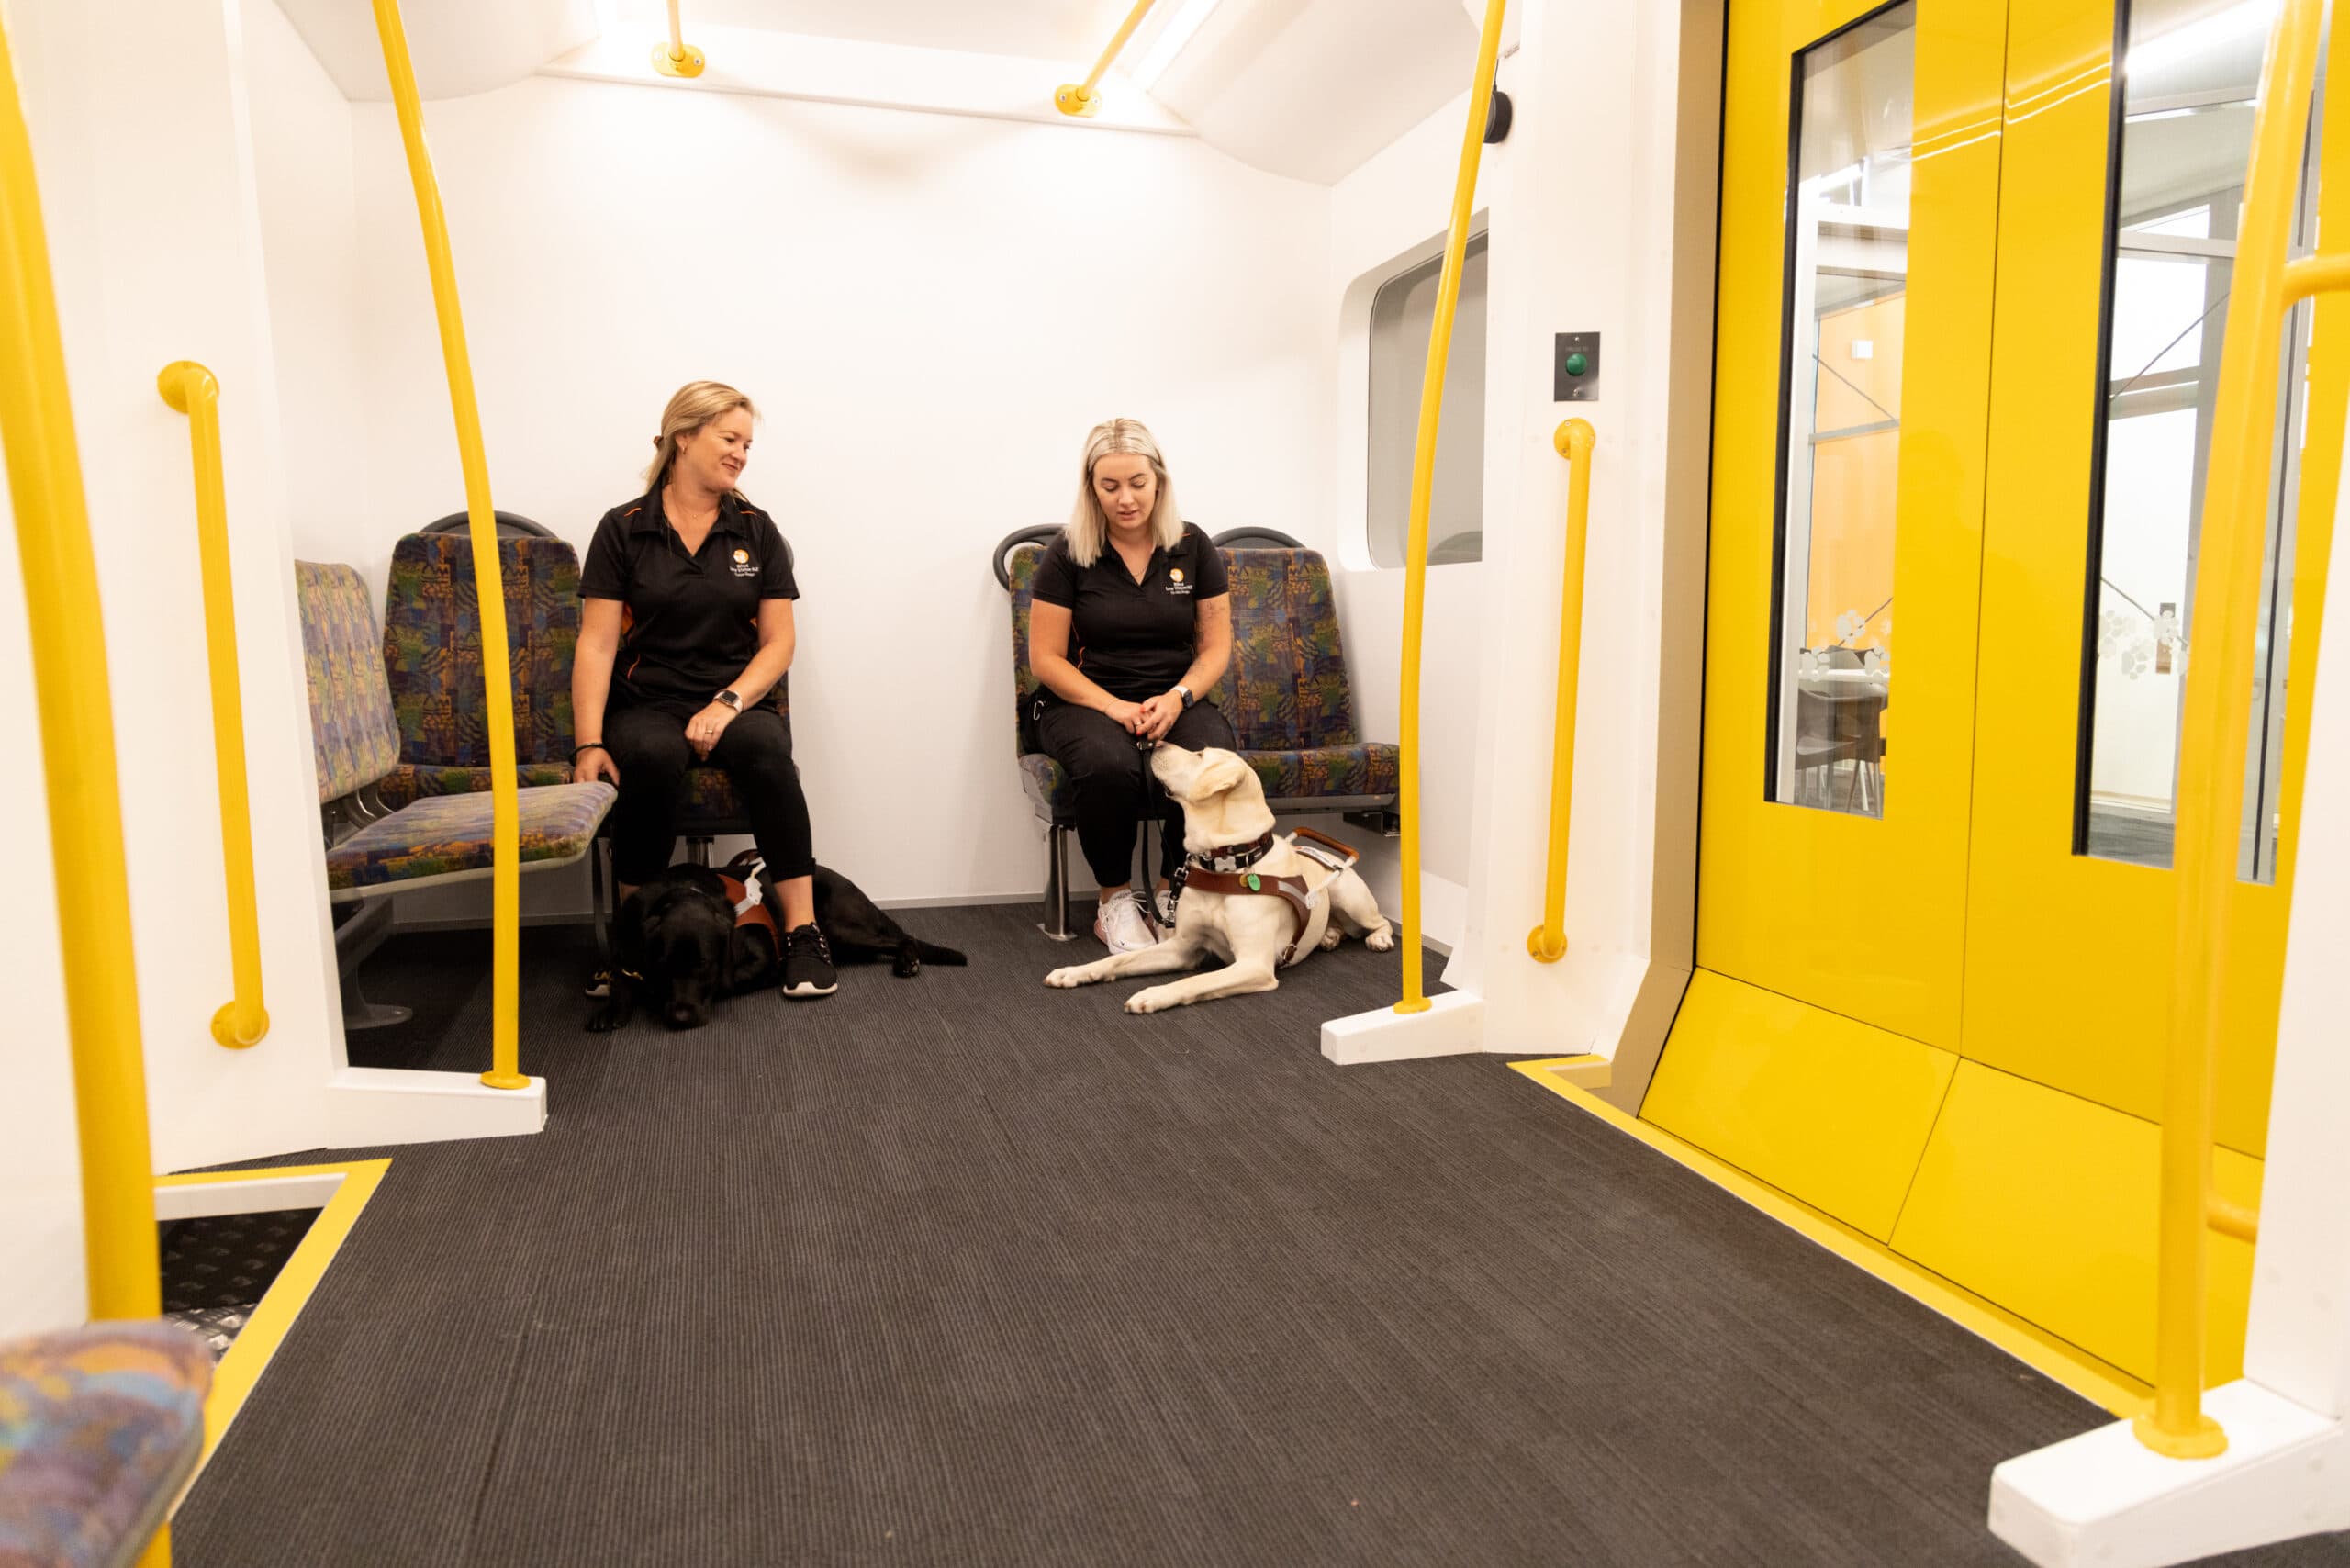 Two Guide Dog trainers sitting with their Guide Dogs inside a simulated train.